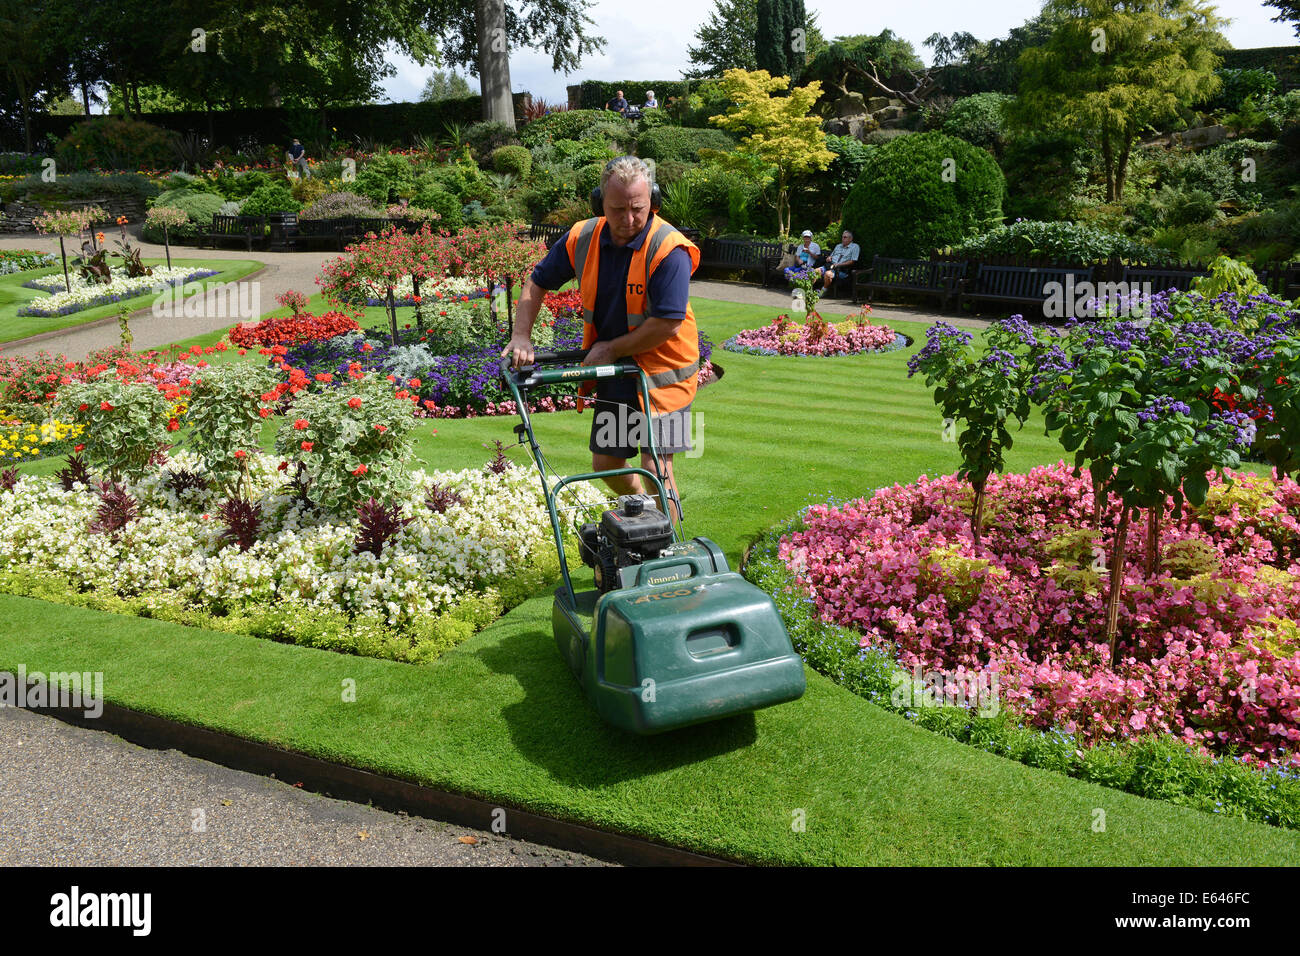 Council gardener in the Dingle gardens in the Quarry a public park in Shrewsbury Uk Stock Photo